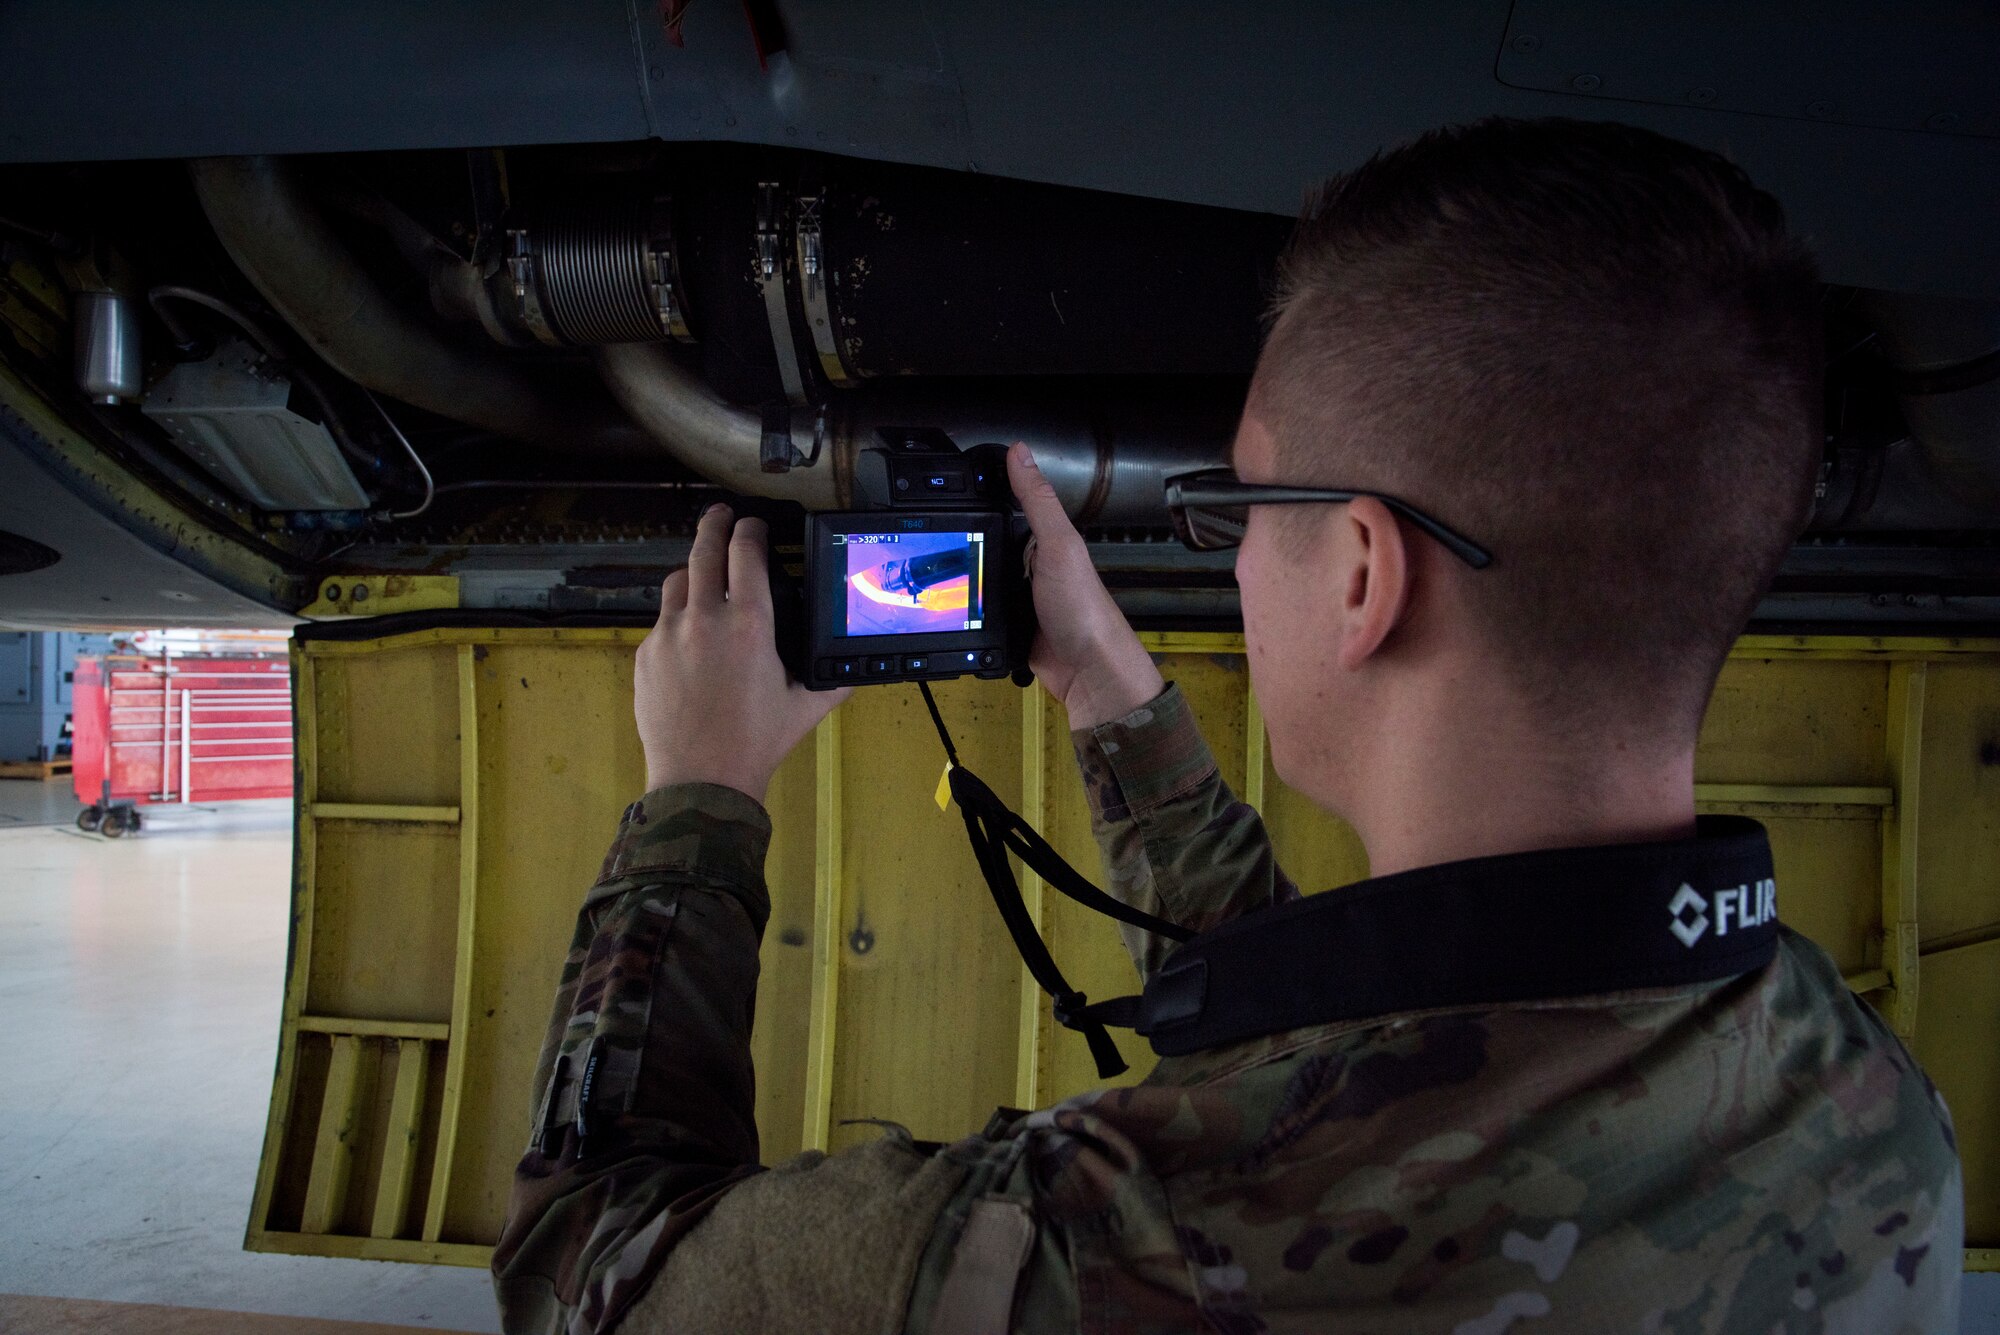 U.S. Air Force Staff Sgt. James Morin, a 6th Aircraft Maintenance thermography certified technician, takes a thermal image of a bleed air duct at MacDill Air Force Base, Fla., March 1, 2019.